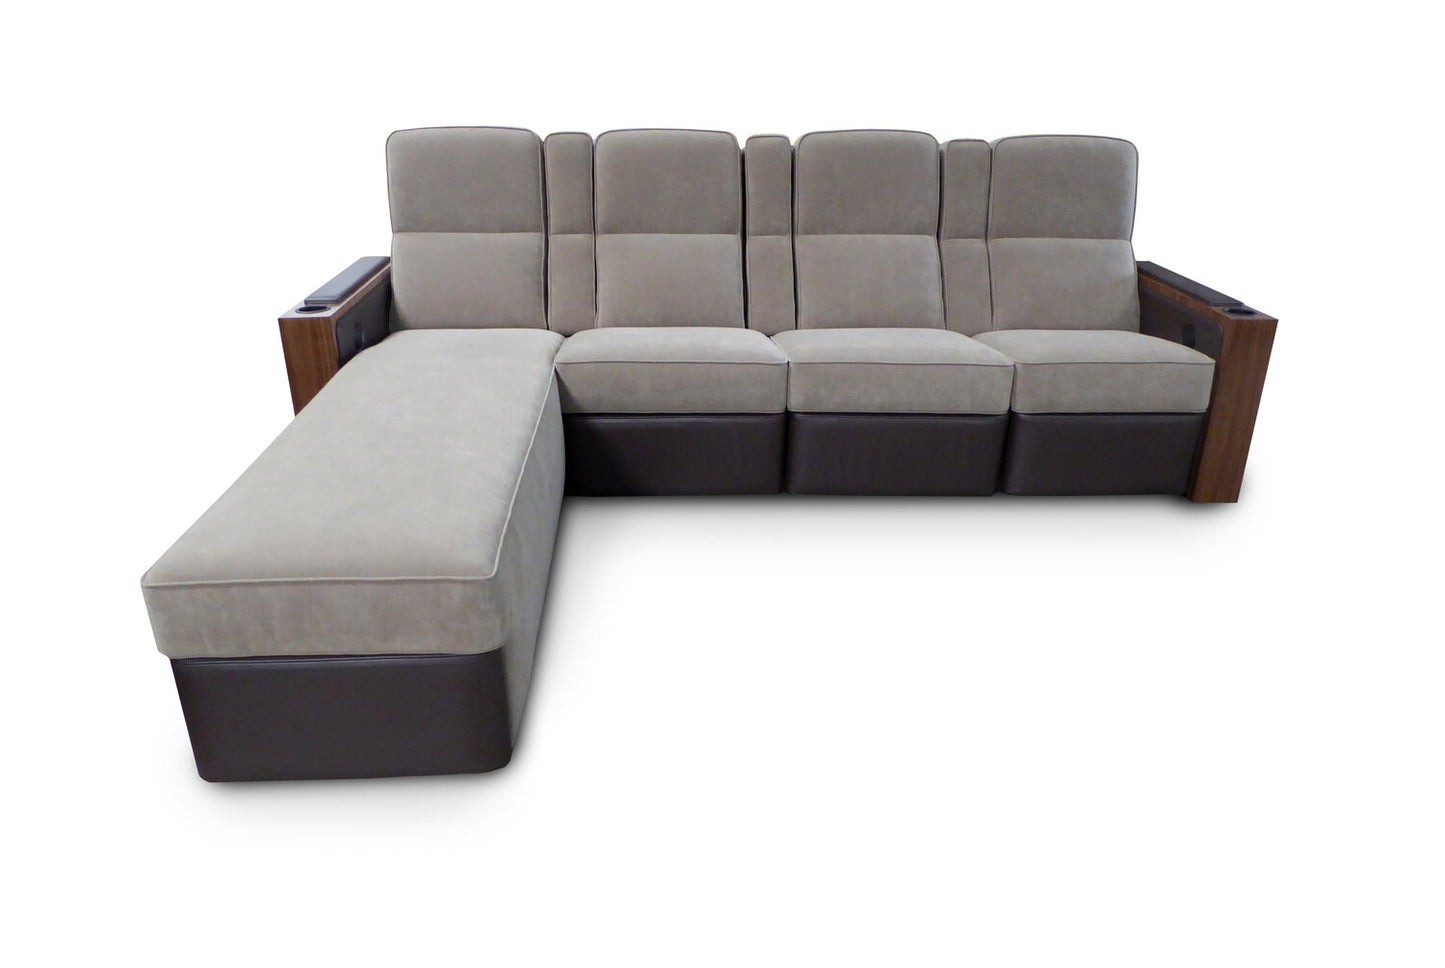 Fortress Seating Hudson chaise